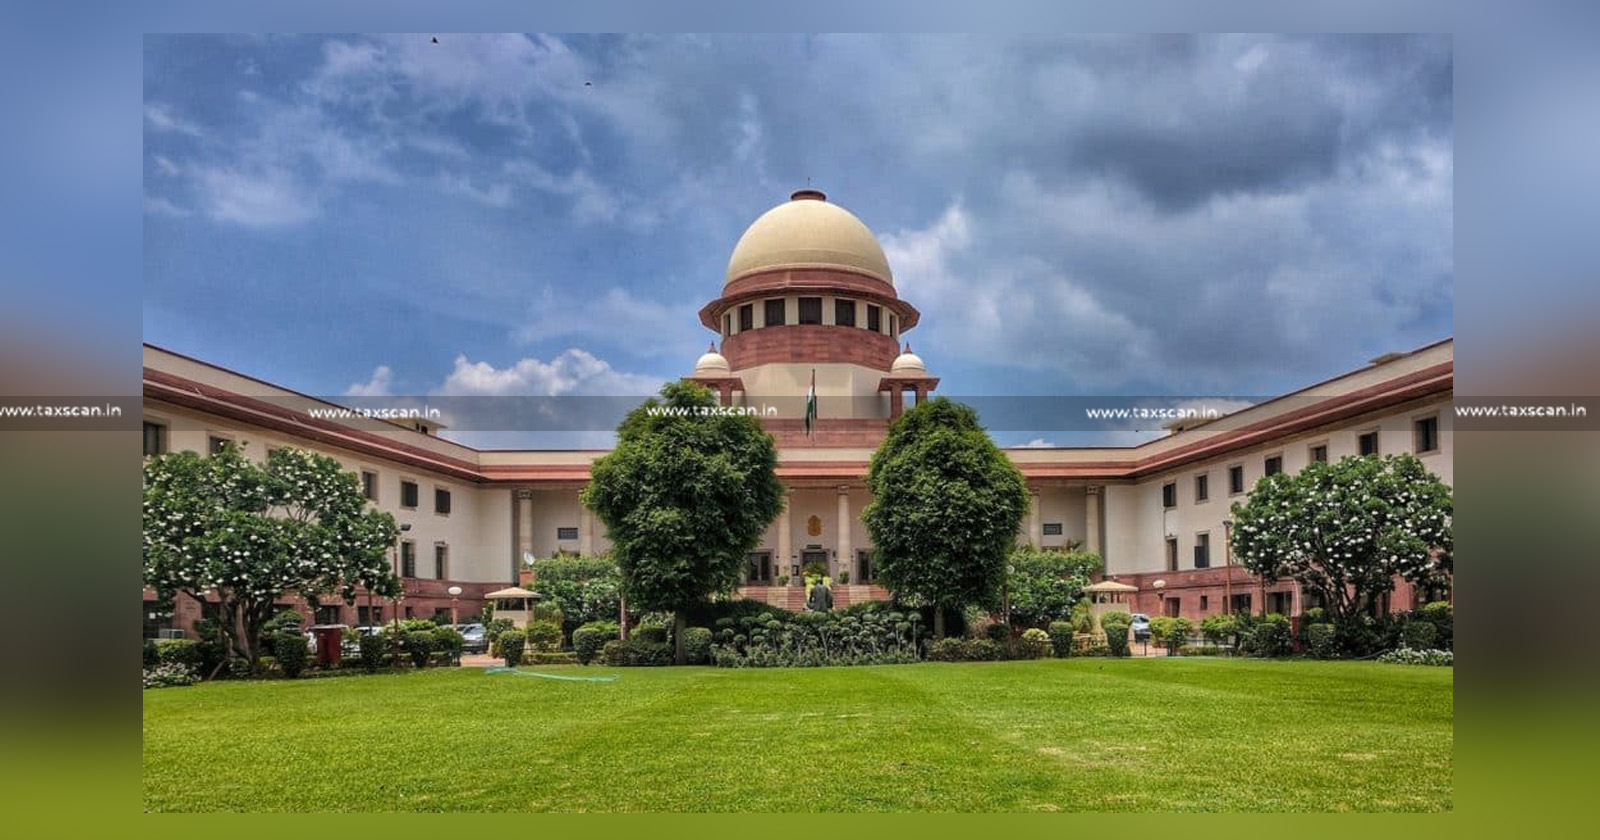 Order passed by Settlement Commission - Income Tax Act - Giving Sufficient Opportunity to Assessee - Undisclosed Income - SC Directs Re-consideration - taxscan